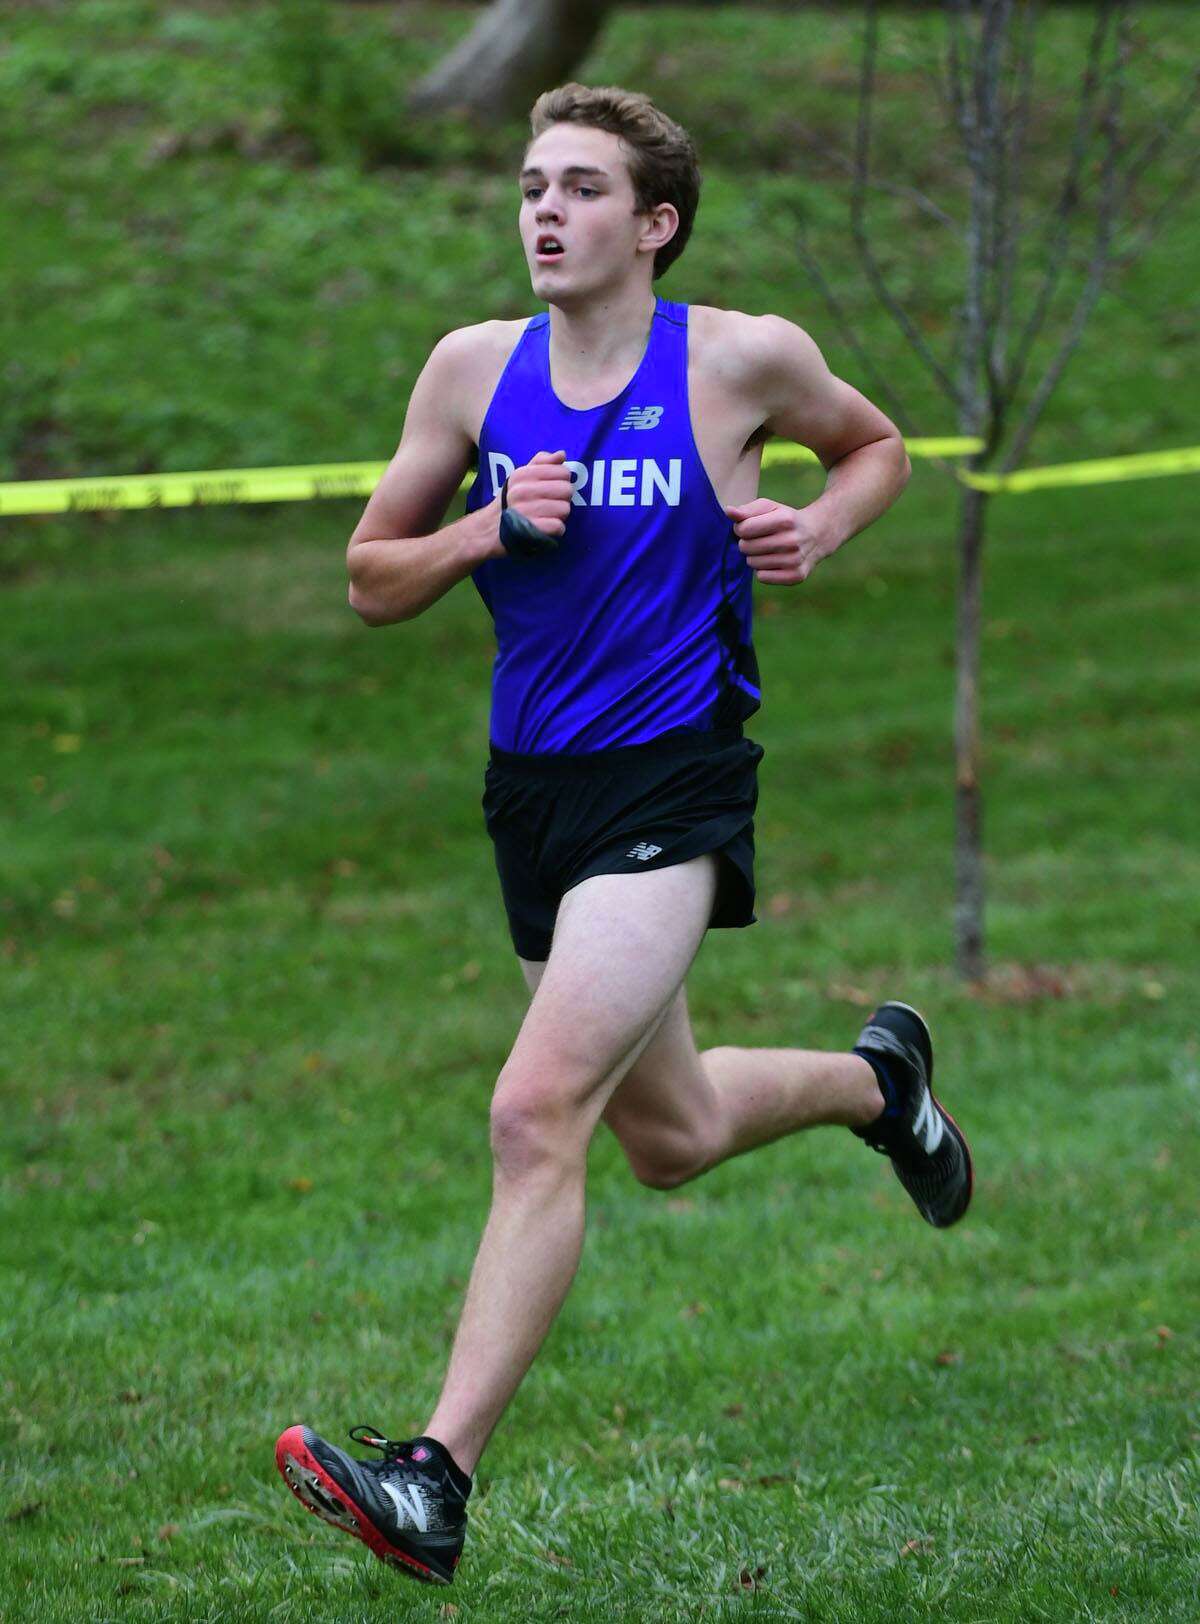 Luke Riordan and the Darien High School boys cross country team takes on Greenwich Tuesday, October 27, 2020, at Tod's Point in Greenwich, Conn.